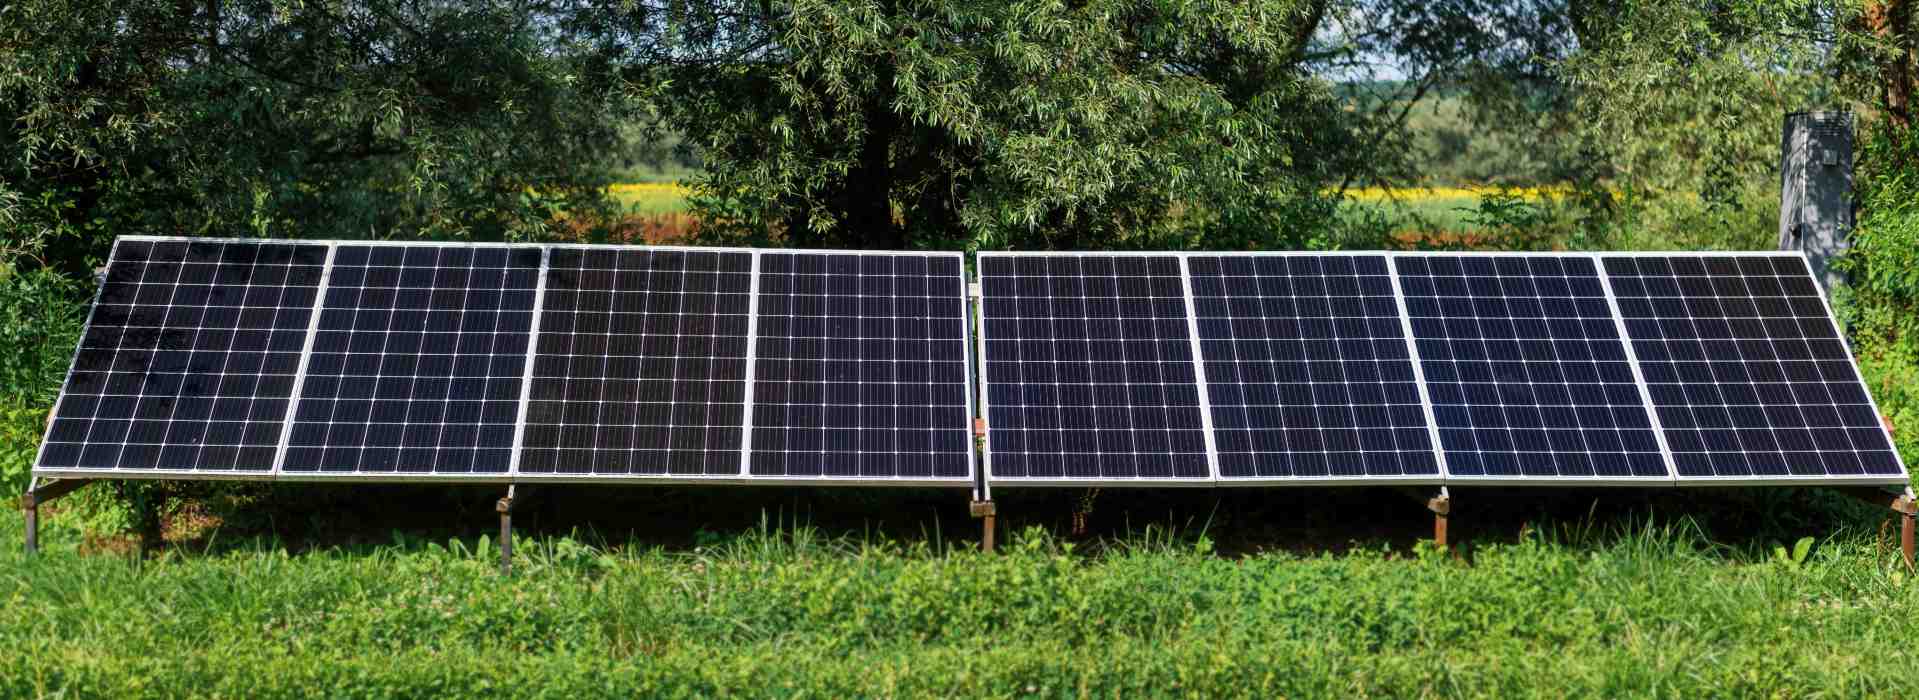 Ground mounted solar panels in a farm